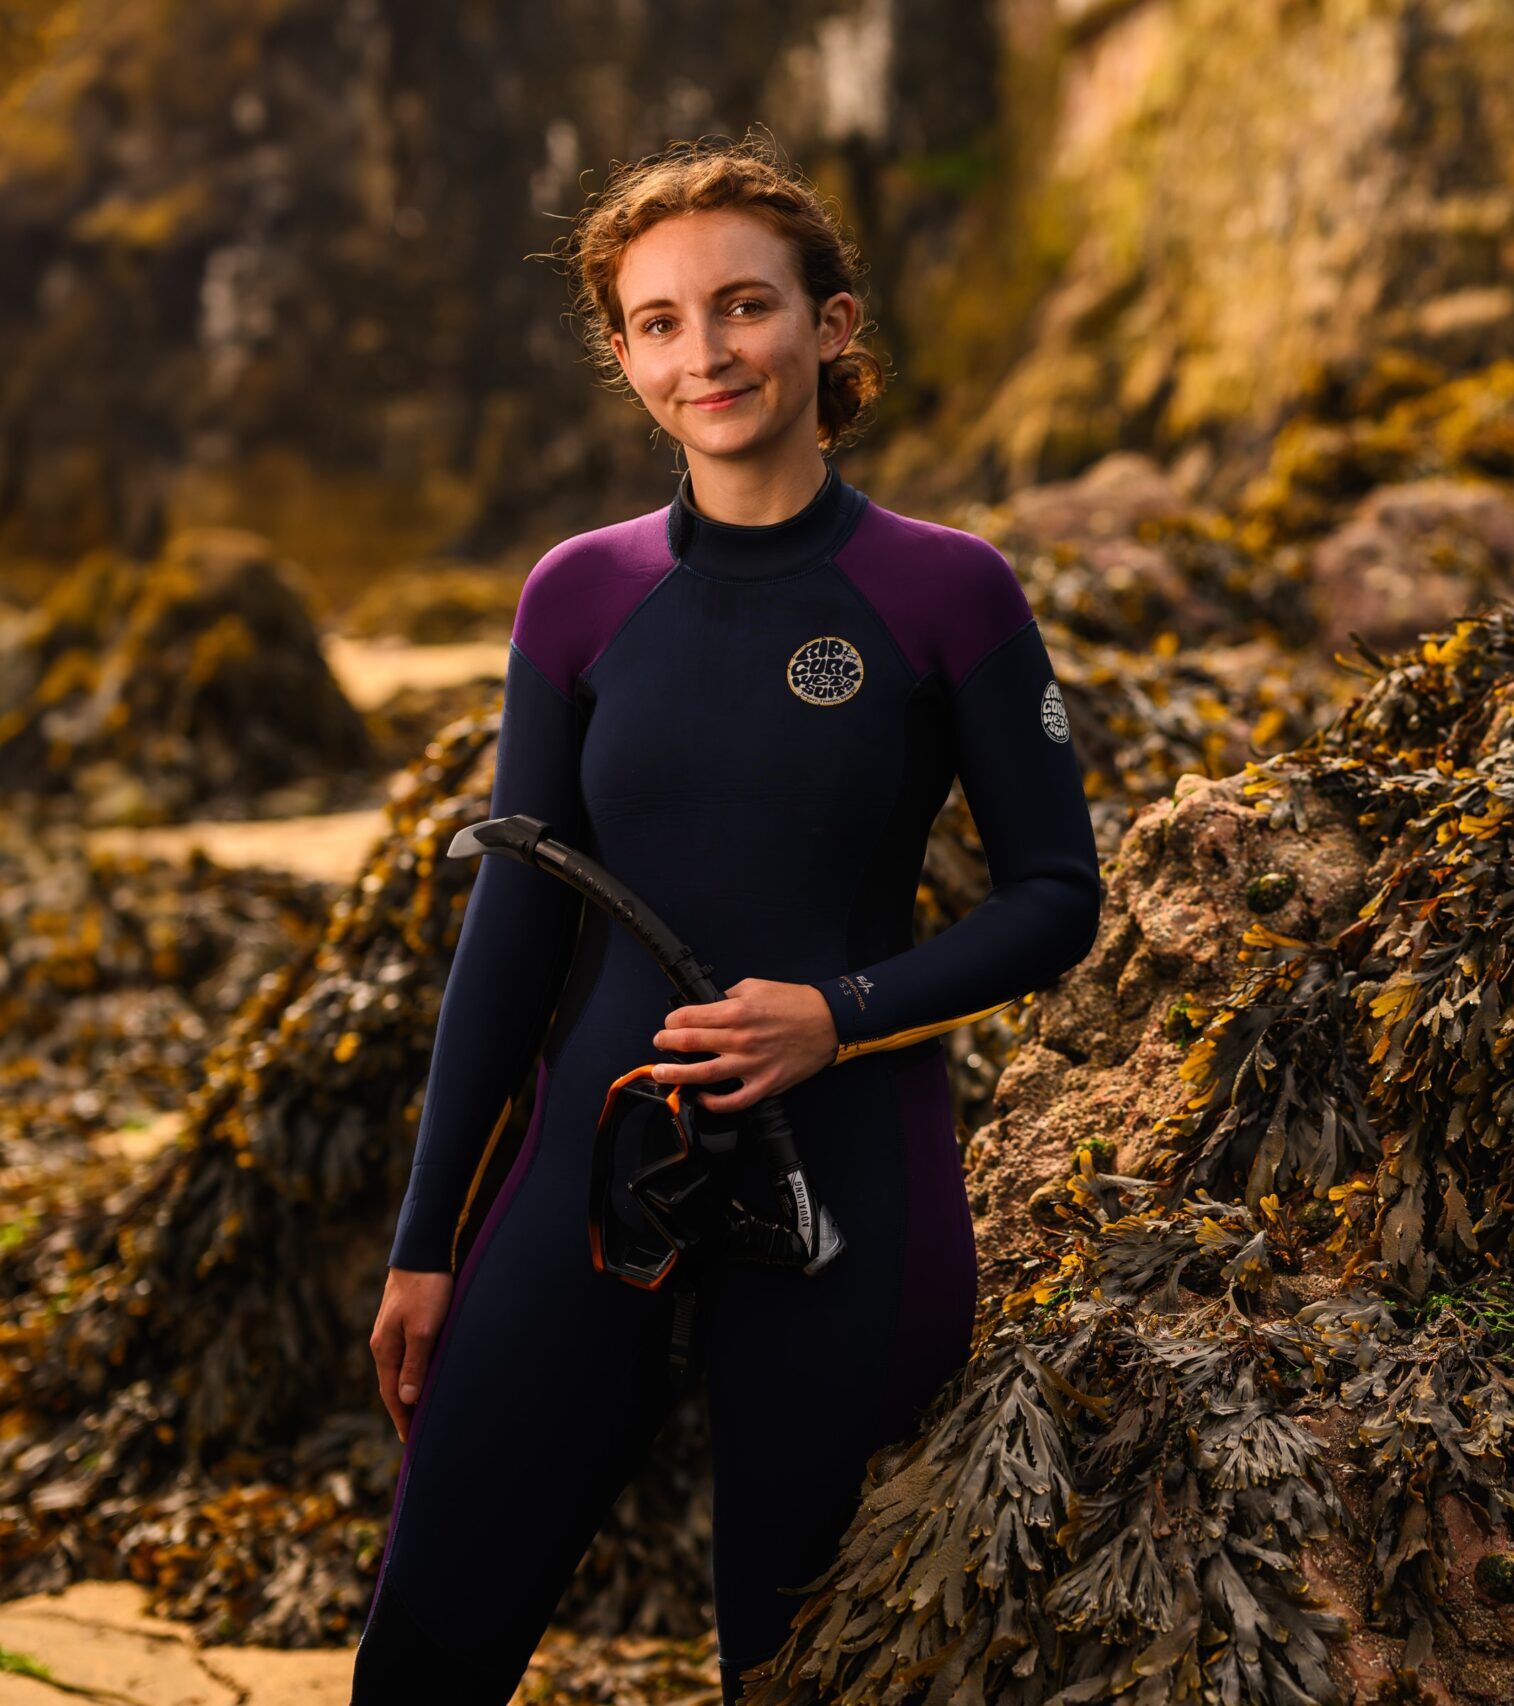 Sophie Corrigan smiling in a wetsuit on the rocky shore surrounded by seaweeds